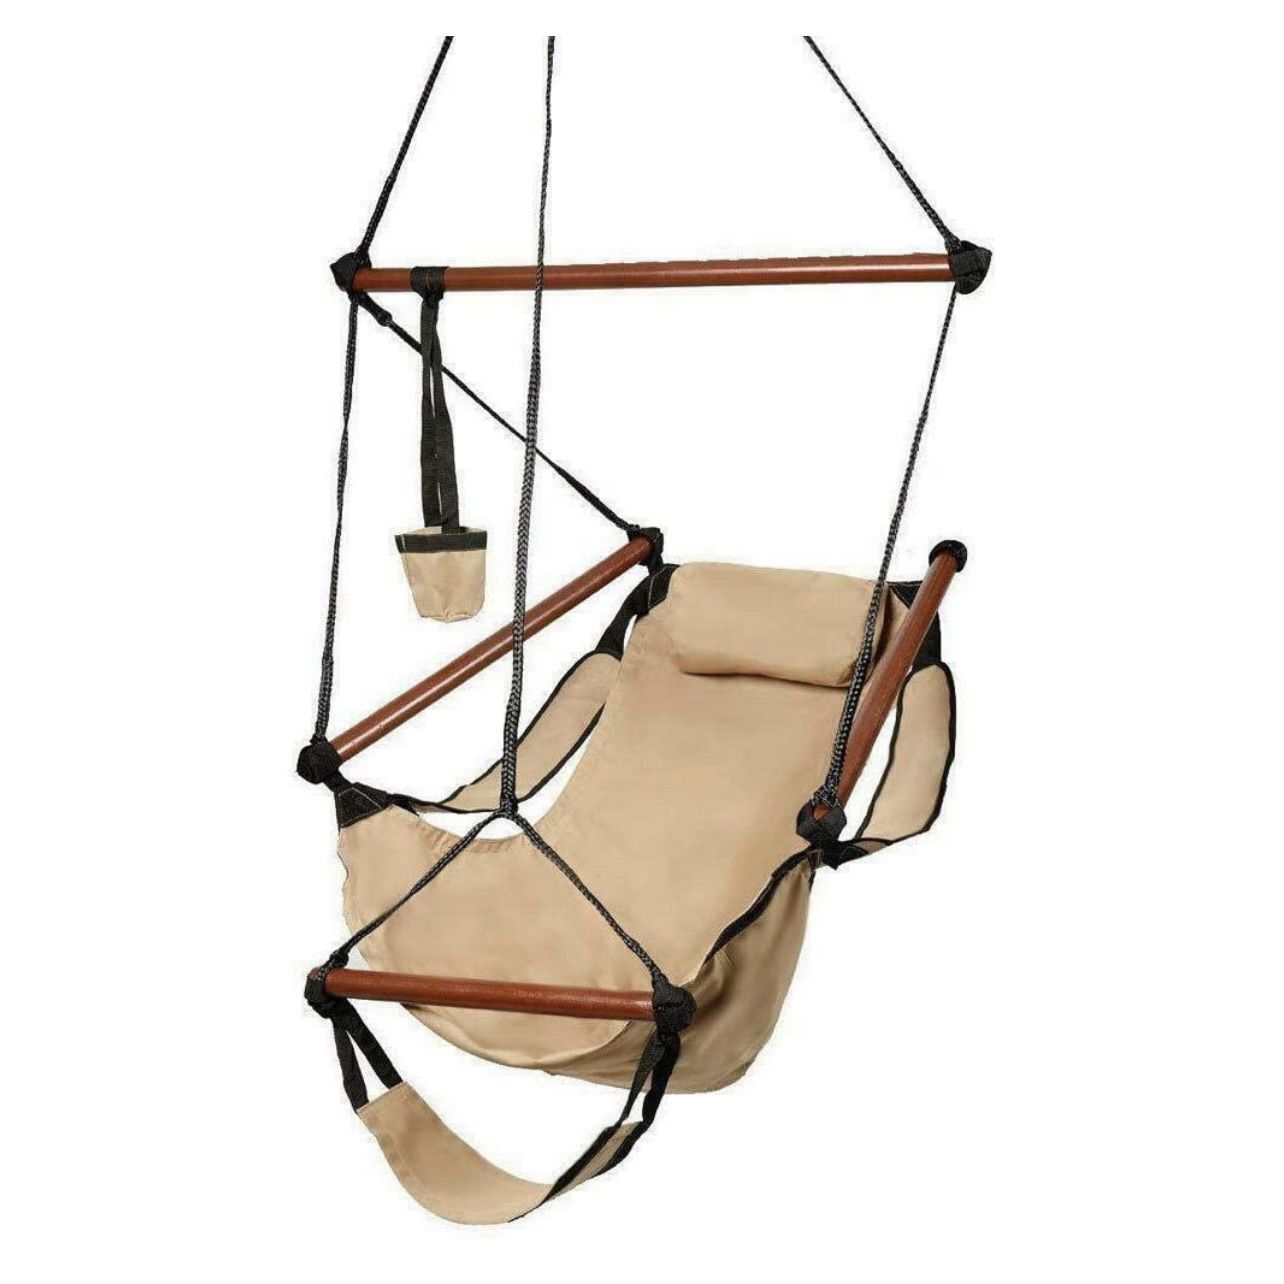 Hammock Chair Swing Hanging Rope Net Chair Porch Patio Outdoor with 2 Cushions